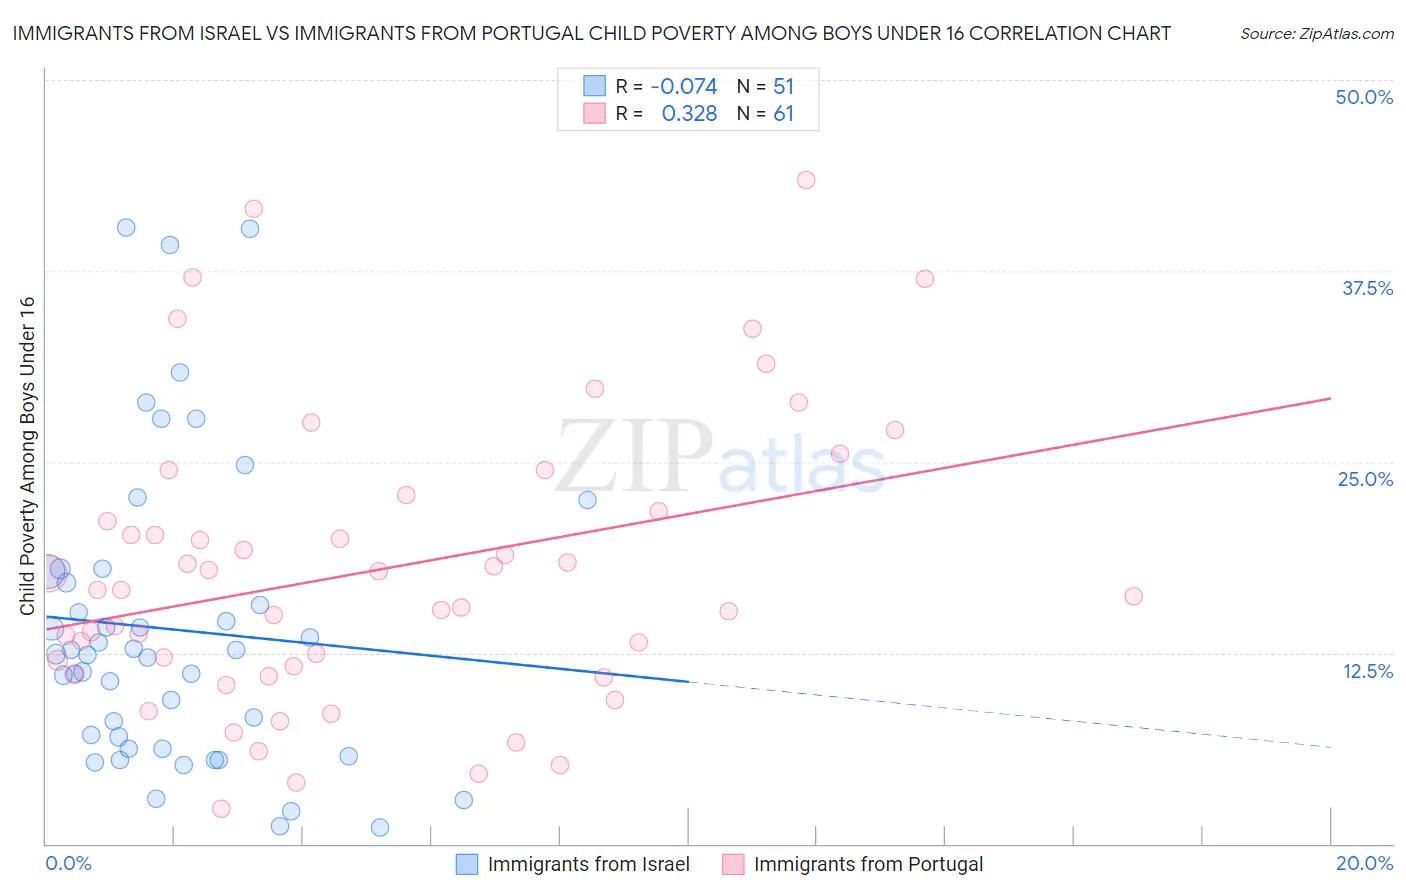 Immigrants from Israel vs Immigrants from Portugal Child Poverty Among Boys Under 16